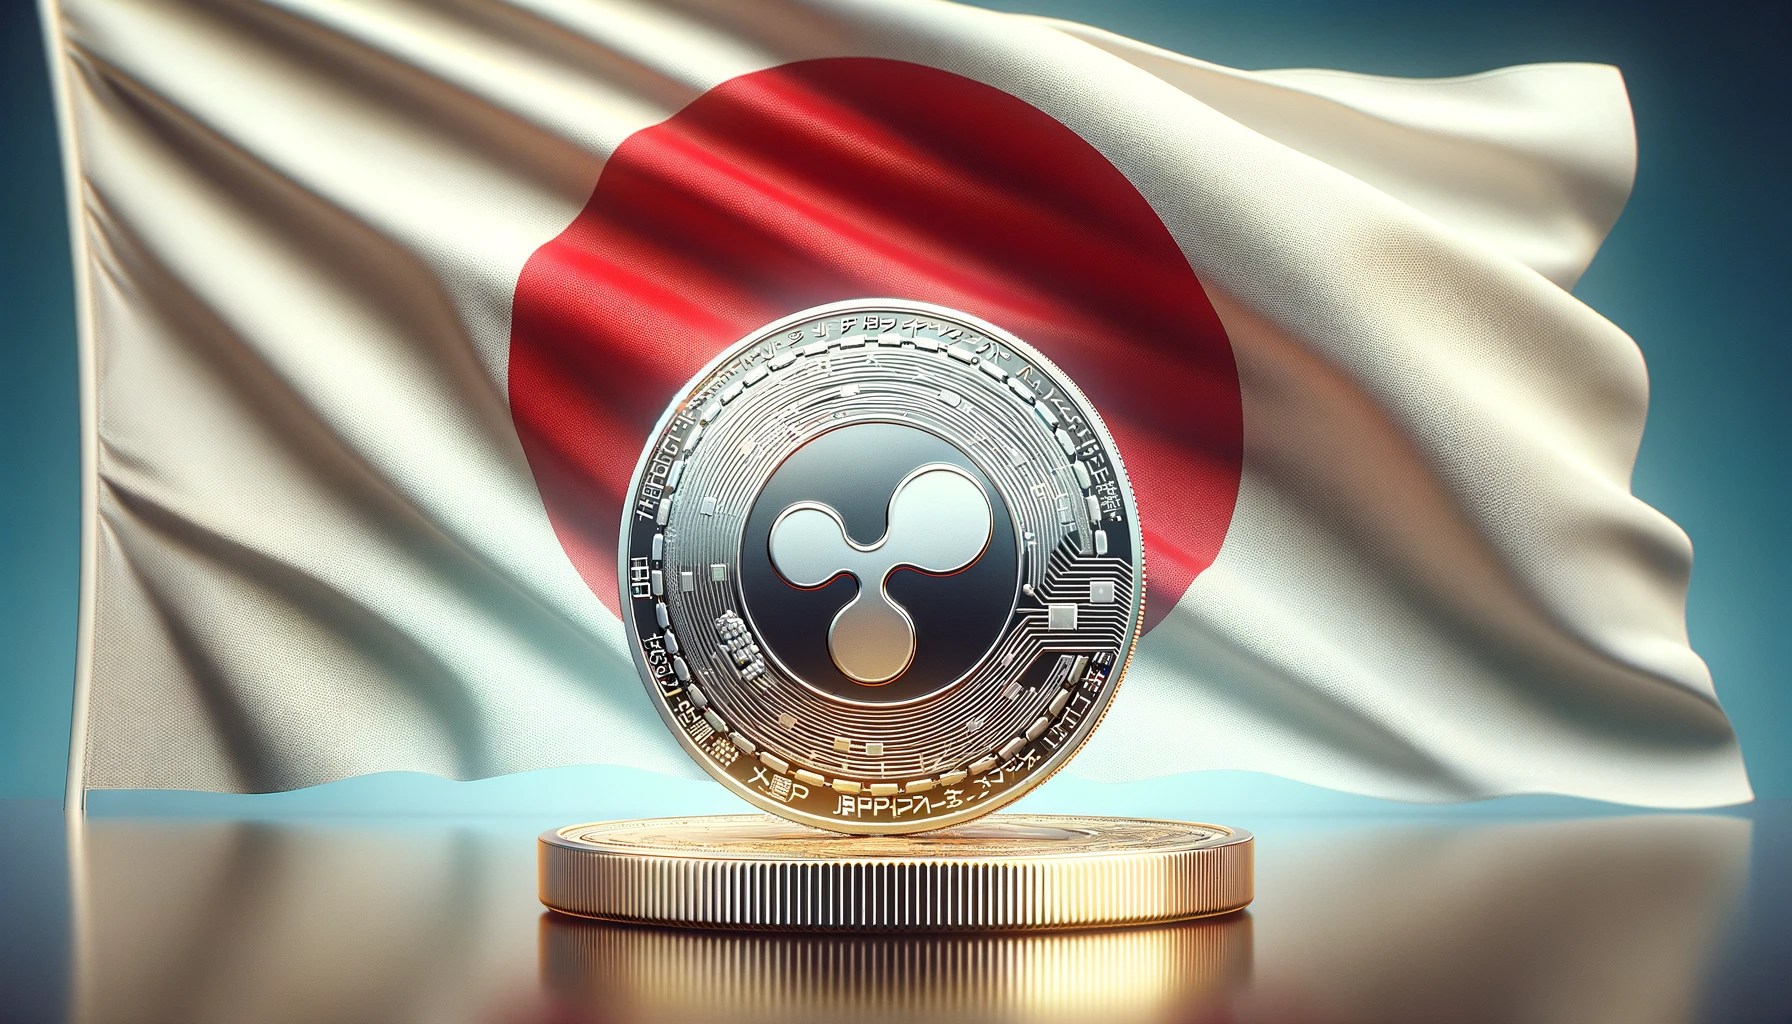 XRP Ledger Validator Launched By Japanese Financial Titan